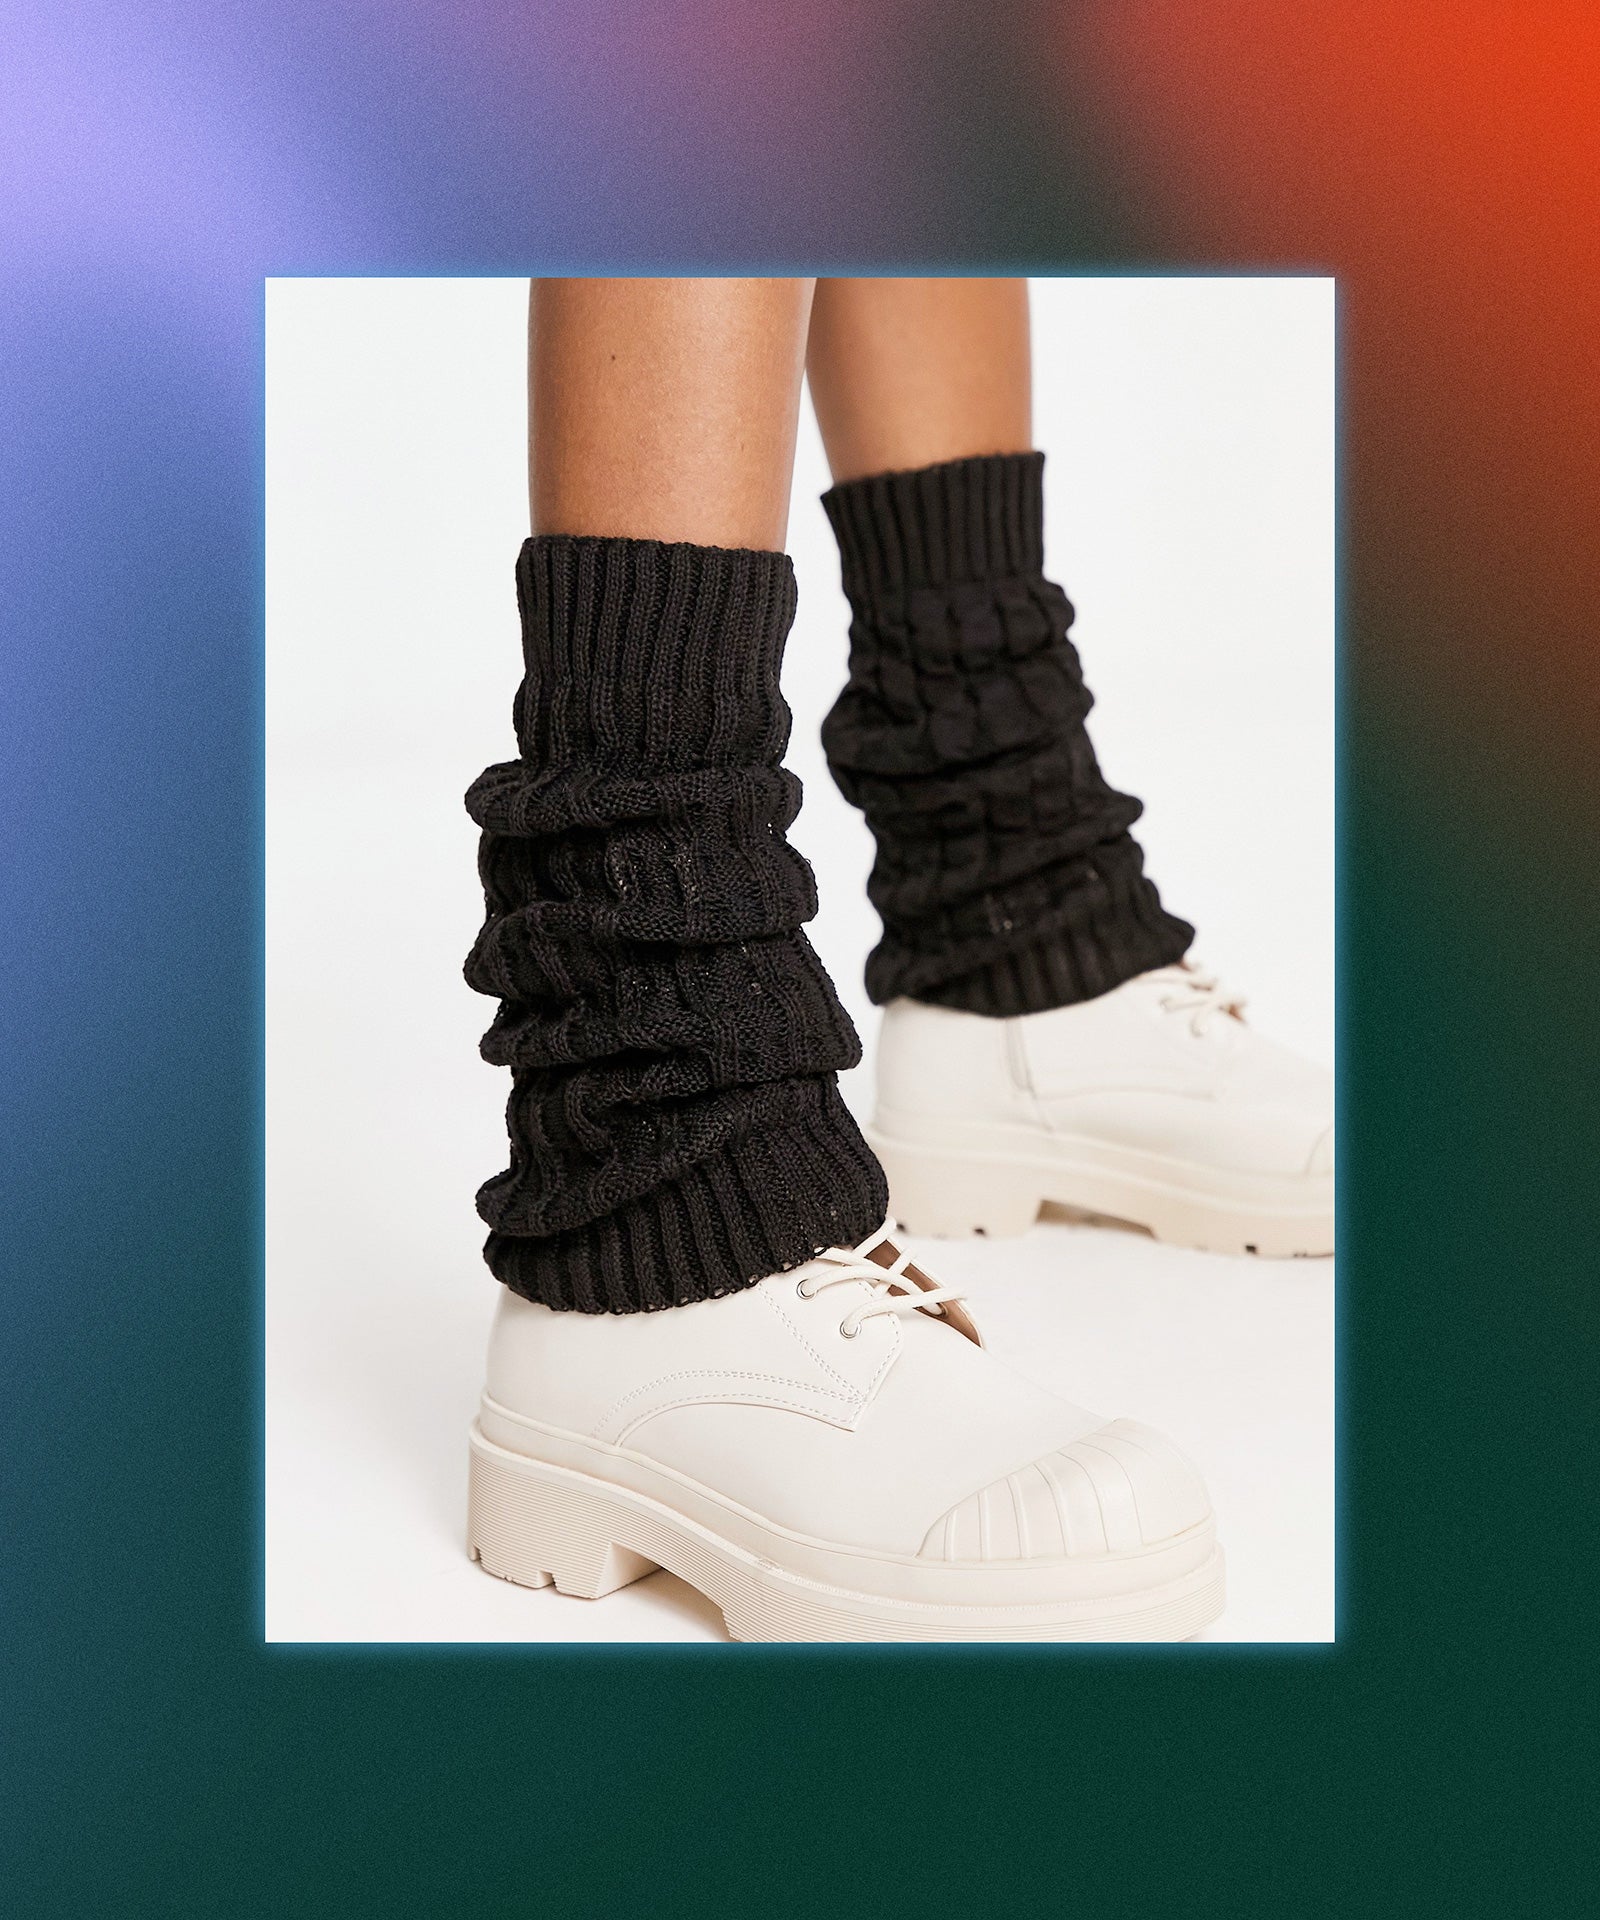 Please help me style leg warmers so I can justify what feels like